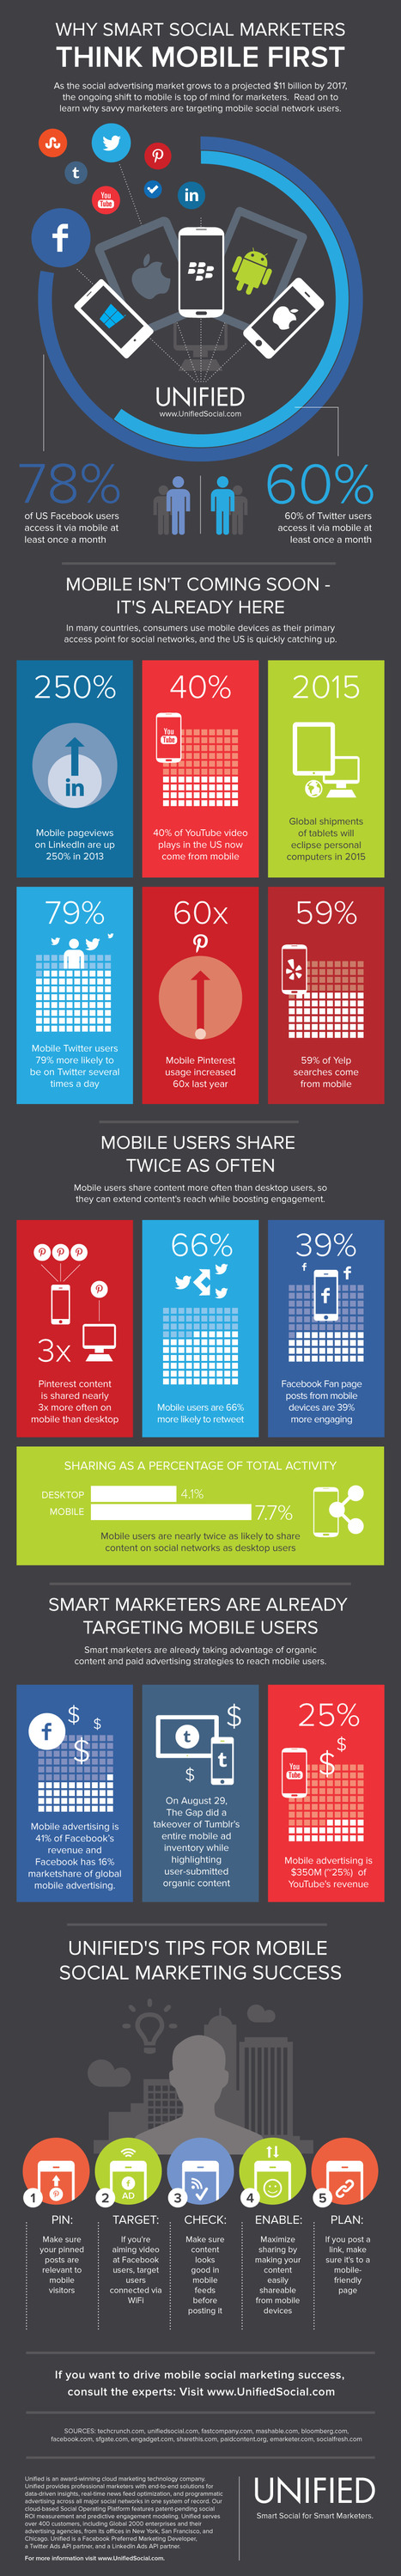 Why Smart Social Marketers Think Mobile First | Internet of Things - Technology focus | Scoop.it